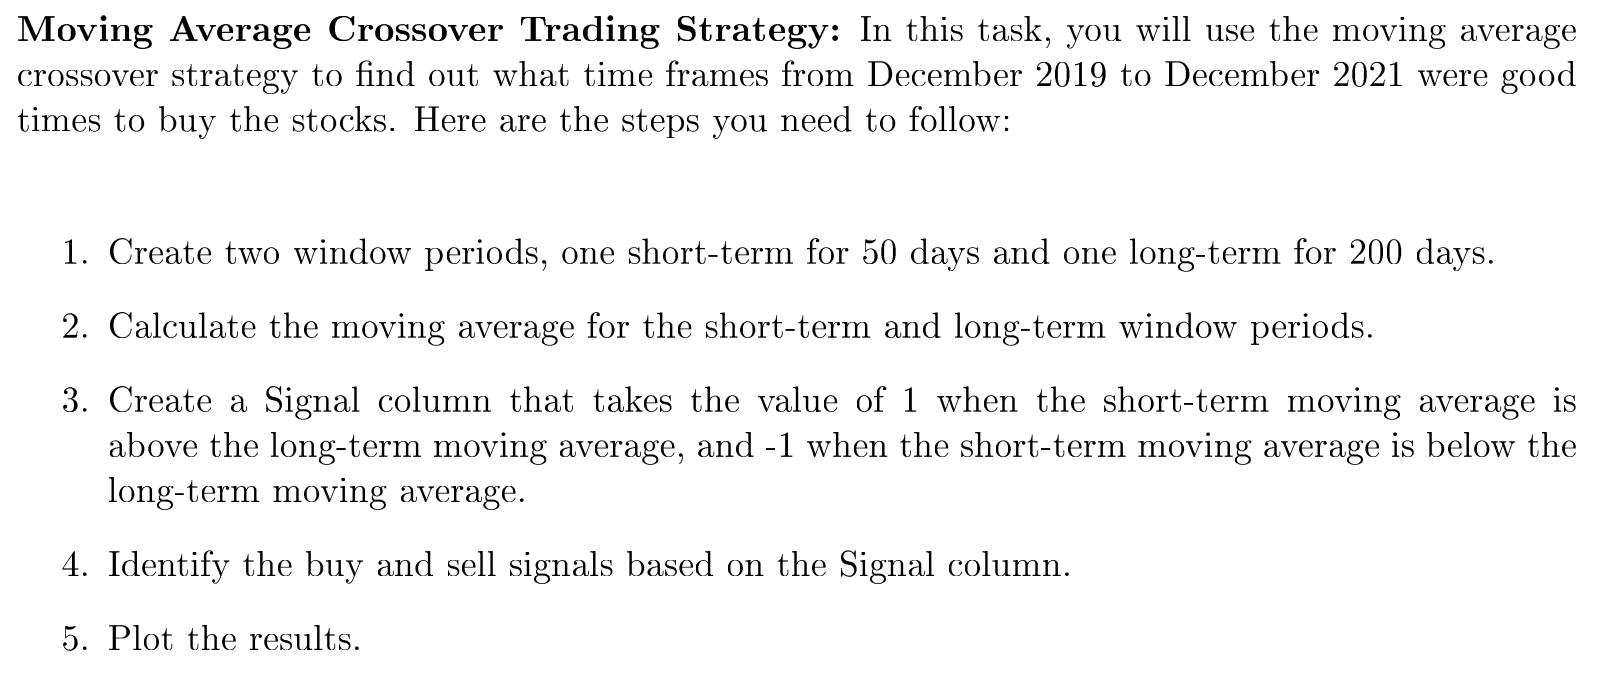 Moving Average Crossover Trading Strategy: In this task, you will use the moving average crossover strategy